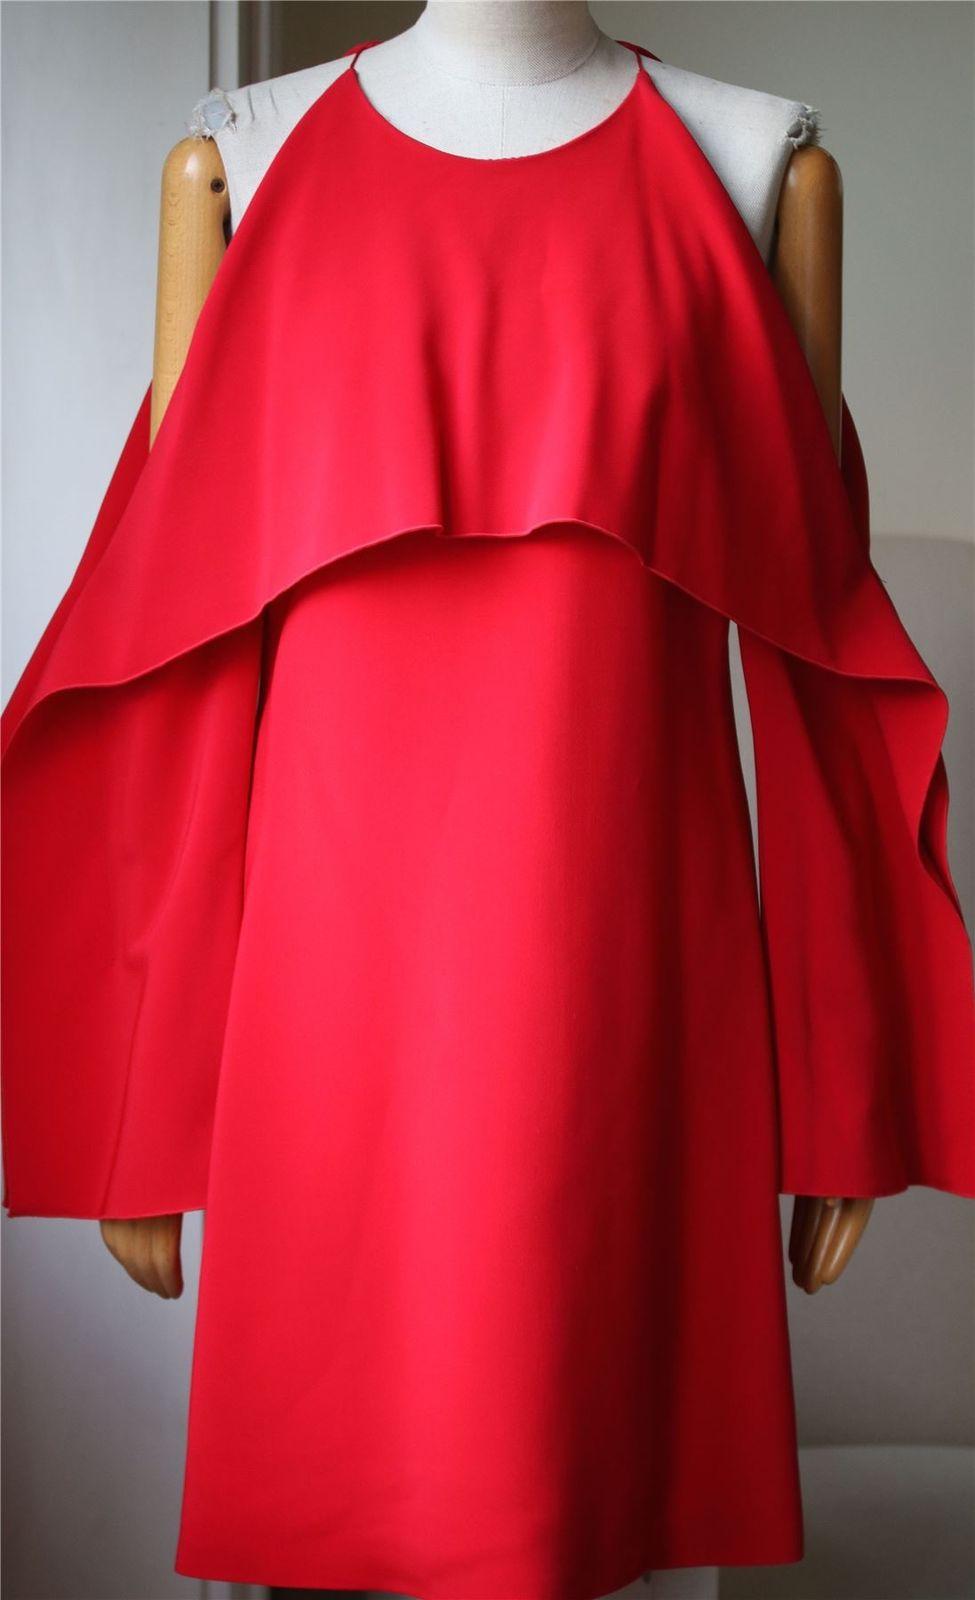 Rosetta Getty's collection is inspired by the iconic felt works of American conceptual artist Robert Morris. Made from stretch-cady, this dress has a draped overlay that folds over the bodice, cutout shoulders and wide, geometric sleeves. Red